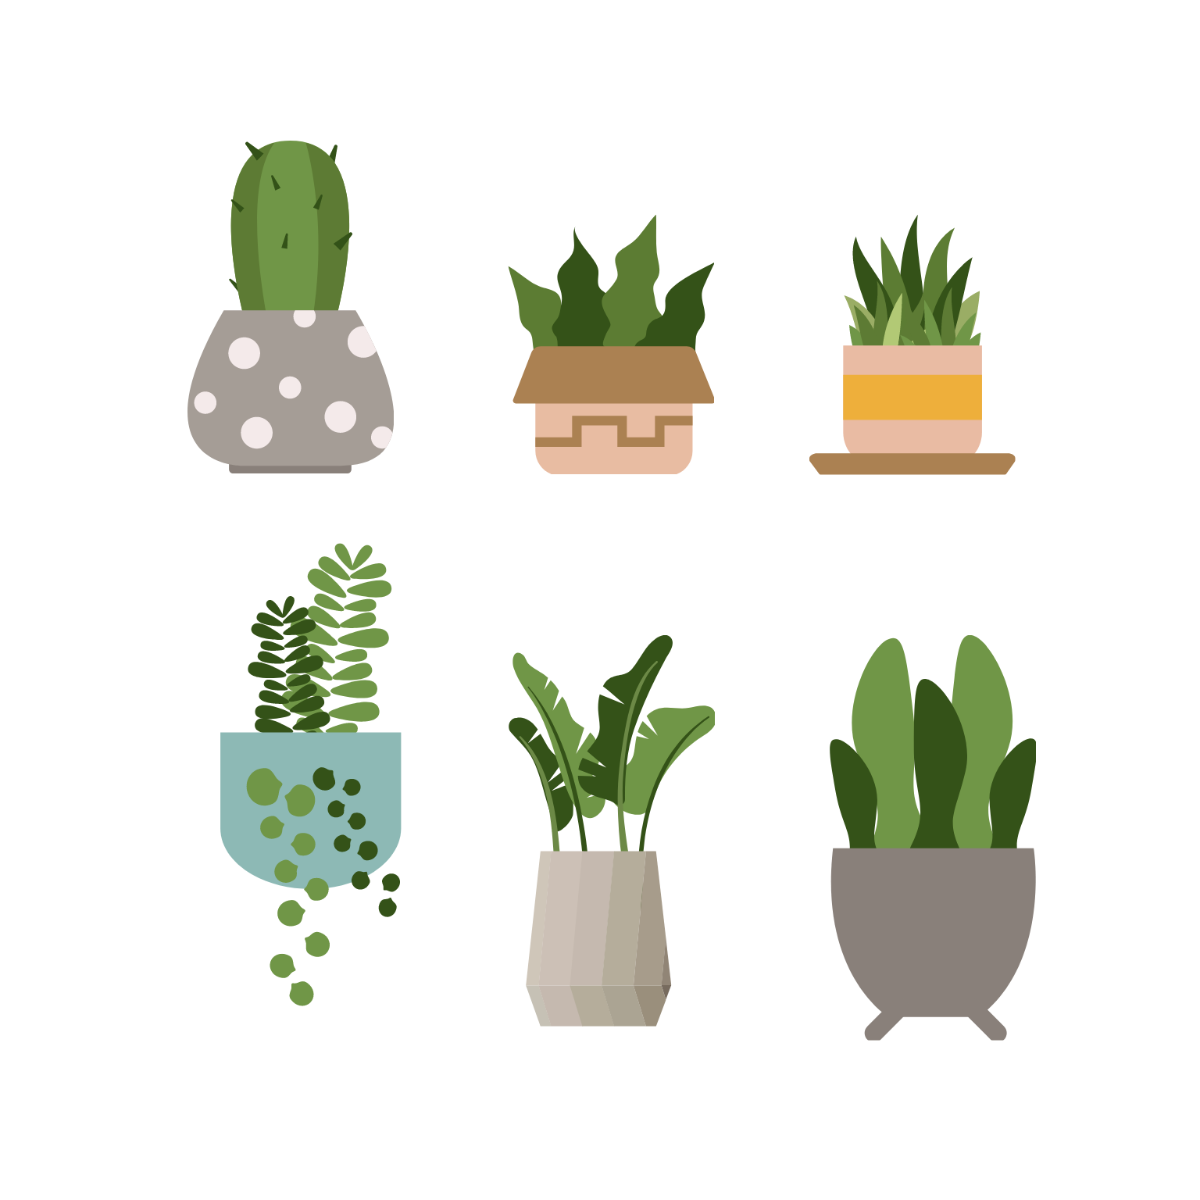 Potted Plant Vector